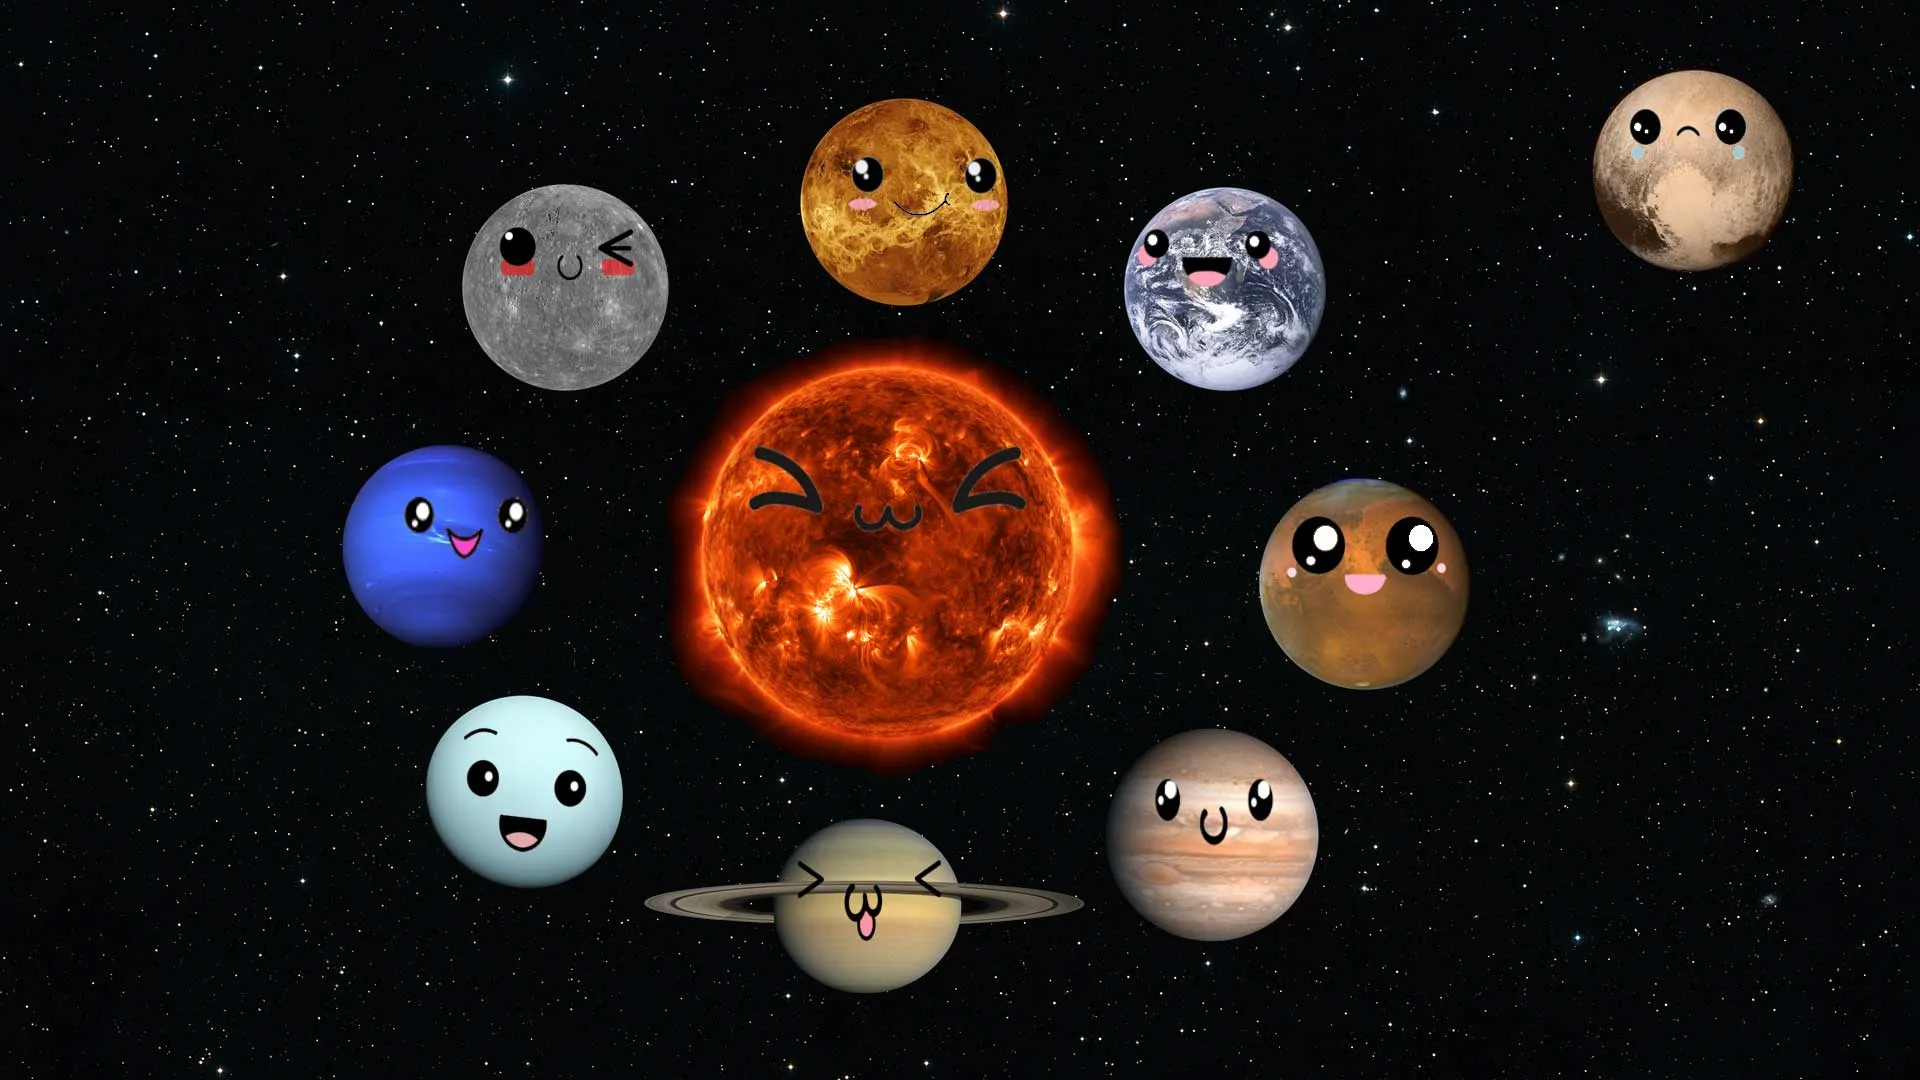 The Sun and the planets of the solar system opposite Pluto